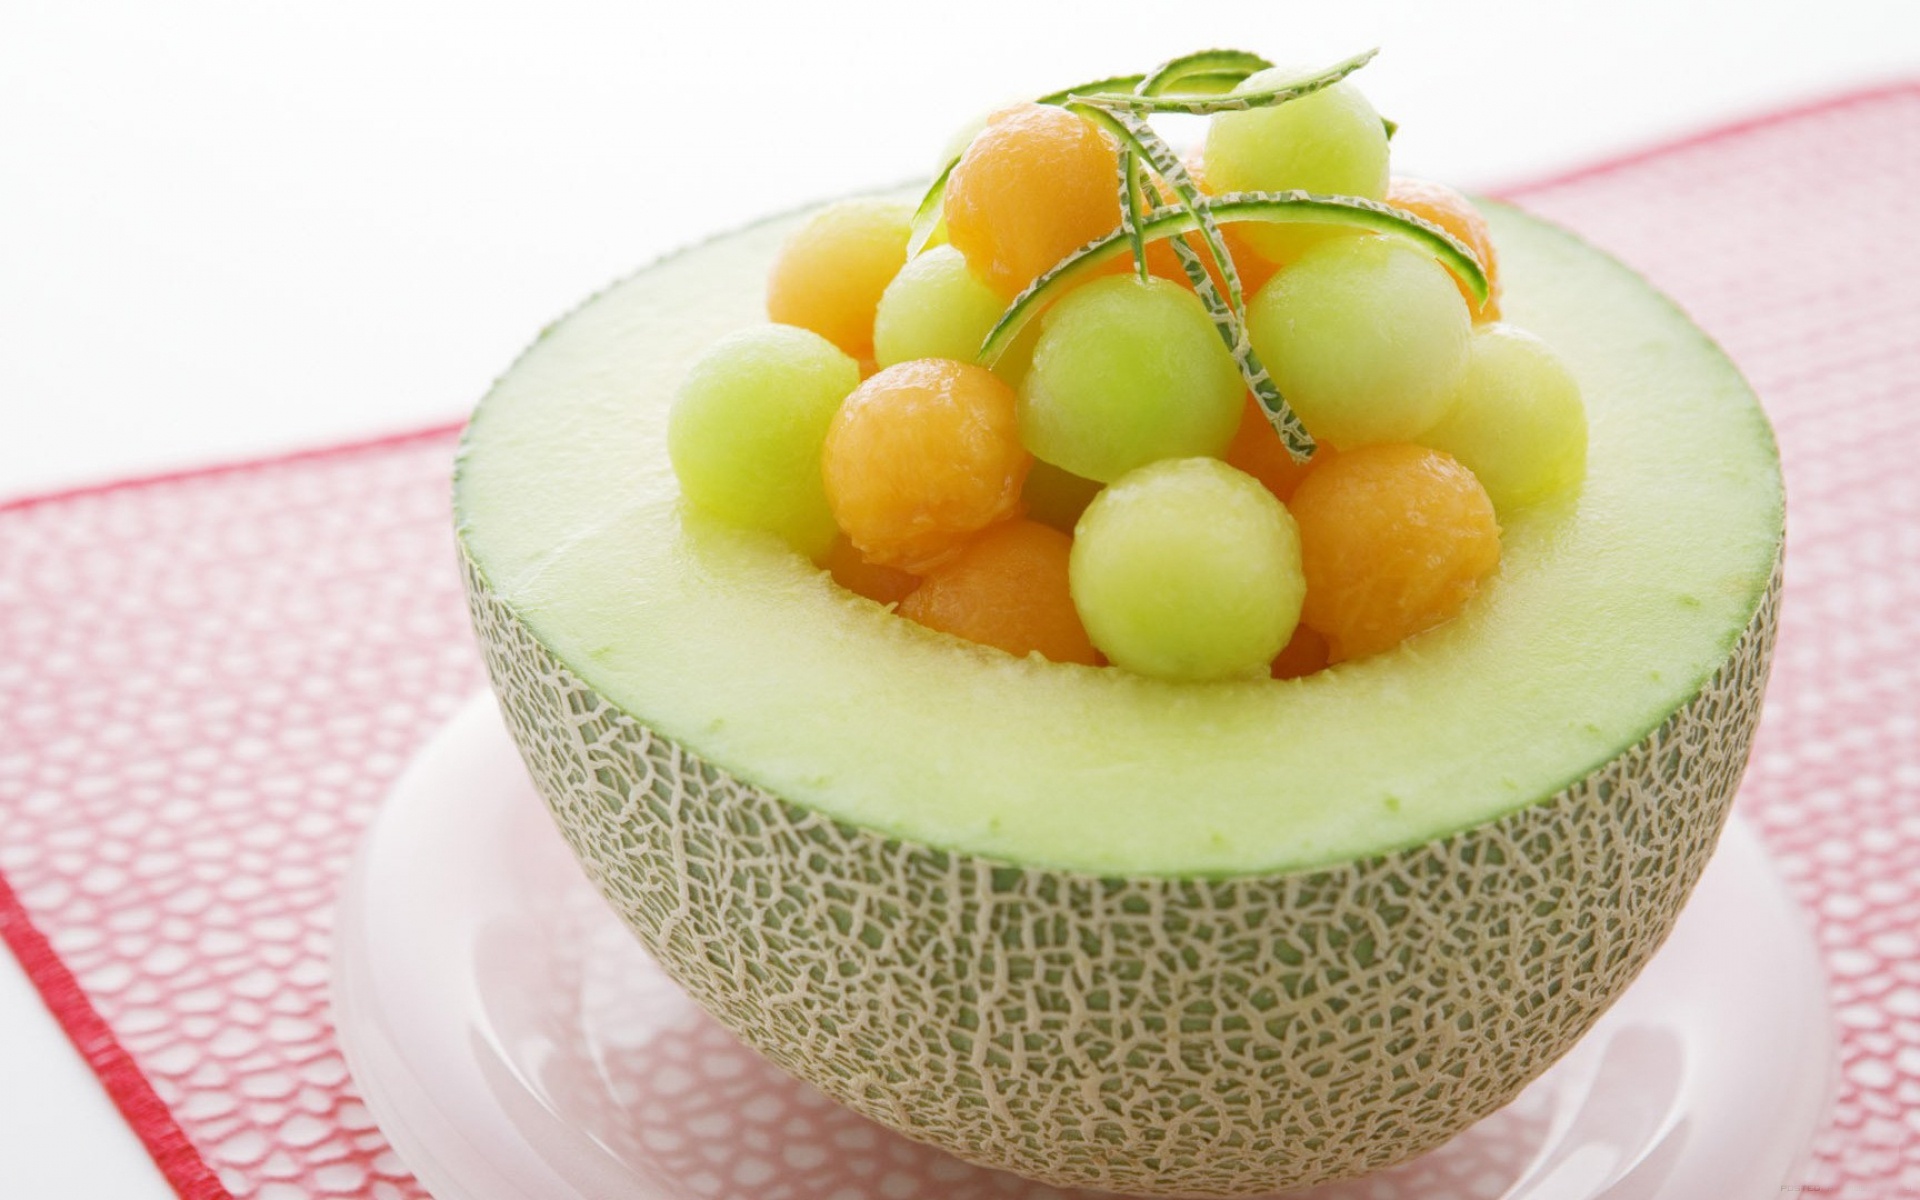 Melon: A cultivated variety of muskmelon, Cucumis melo cantalupensis. 1920x1200 HD Wallpaper.